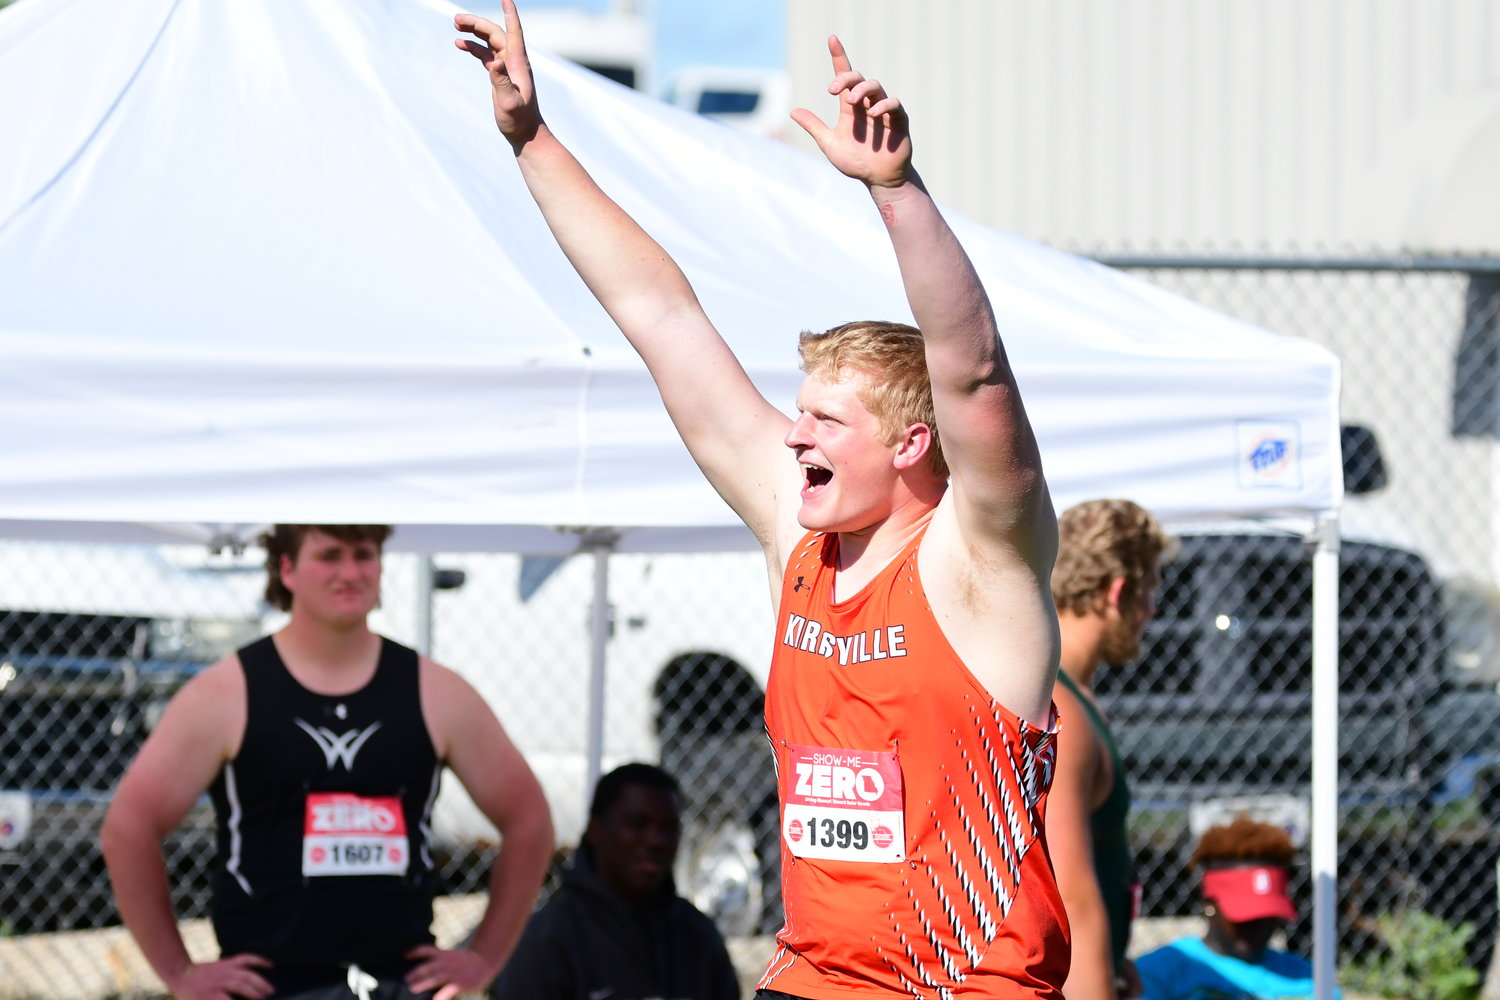 Kirksville's Owen Fraser celebrates after setting a new school discus record with a throw of 56.92 meters.